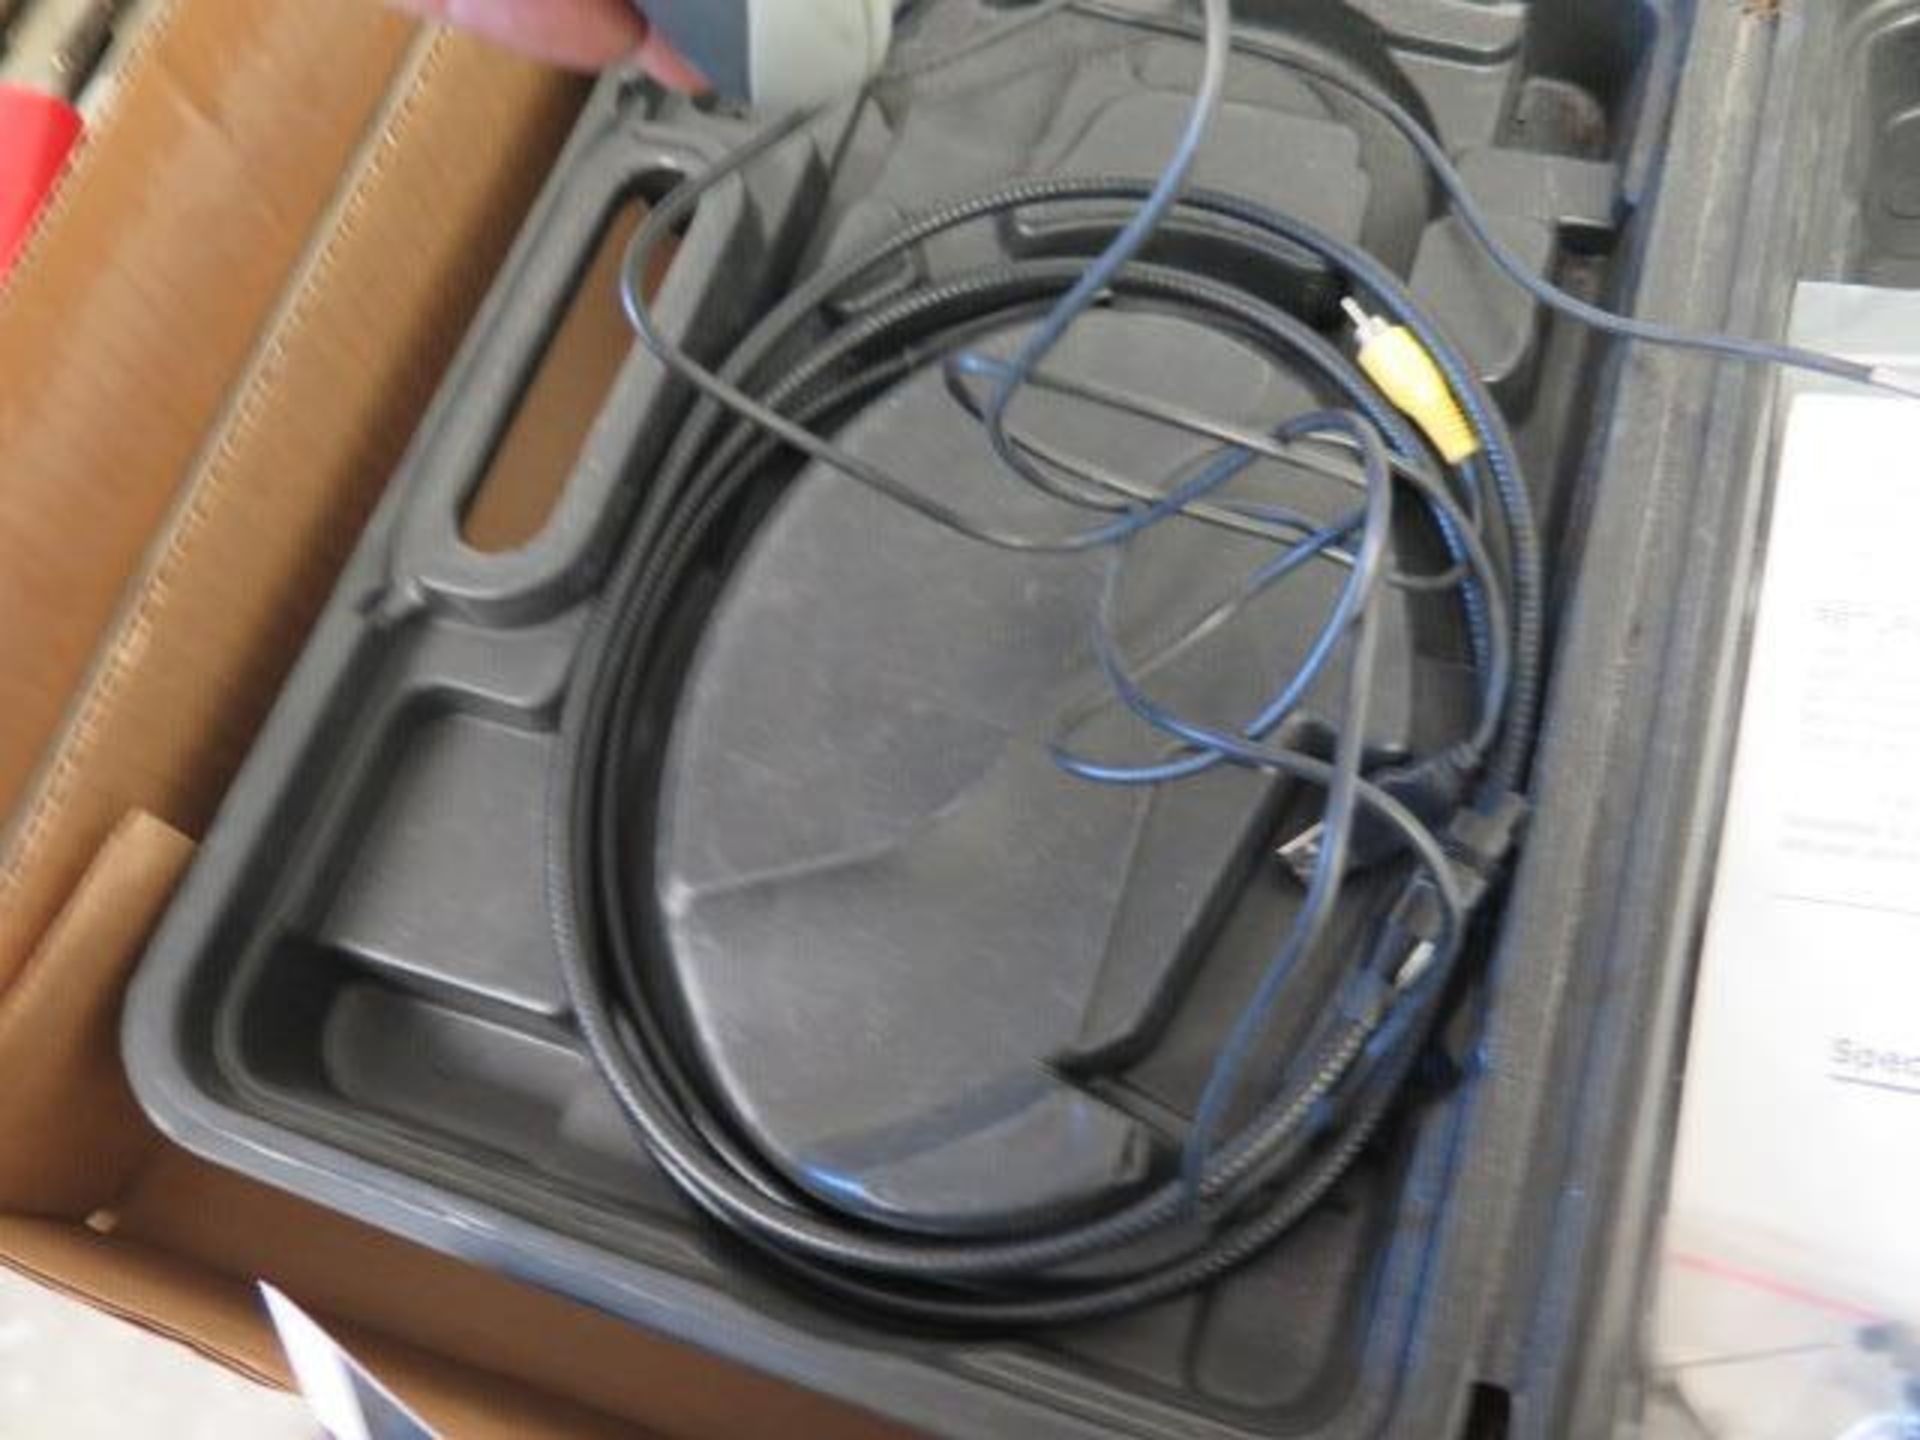 General "iBorescope" mdlDCiS1 Bore Scope (SOLD AS-IS - NO WARRANTY) - Image 5 of 6